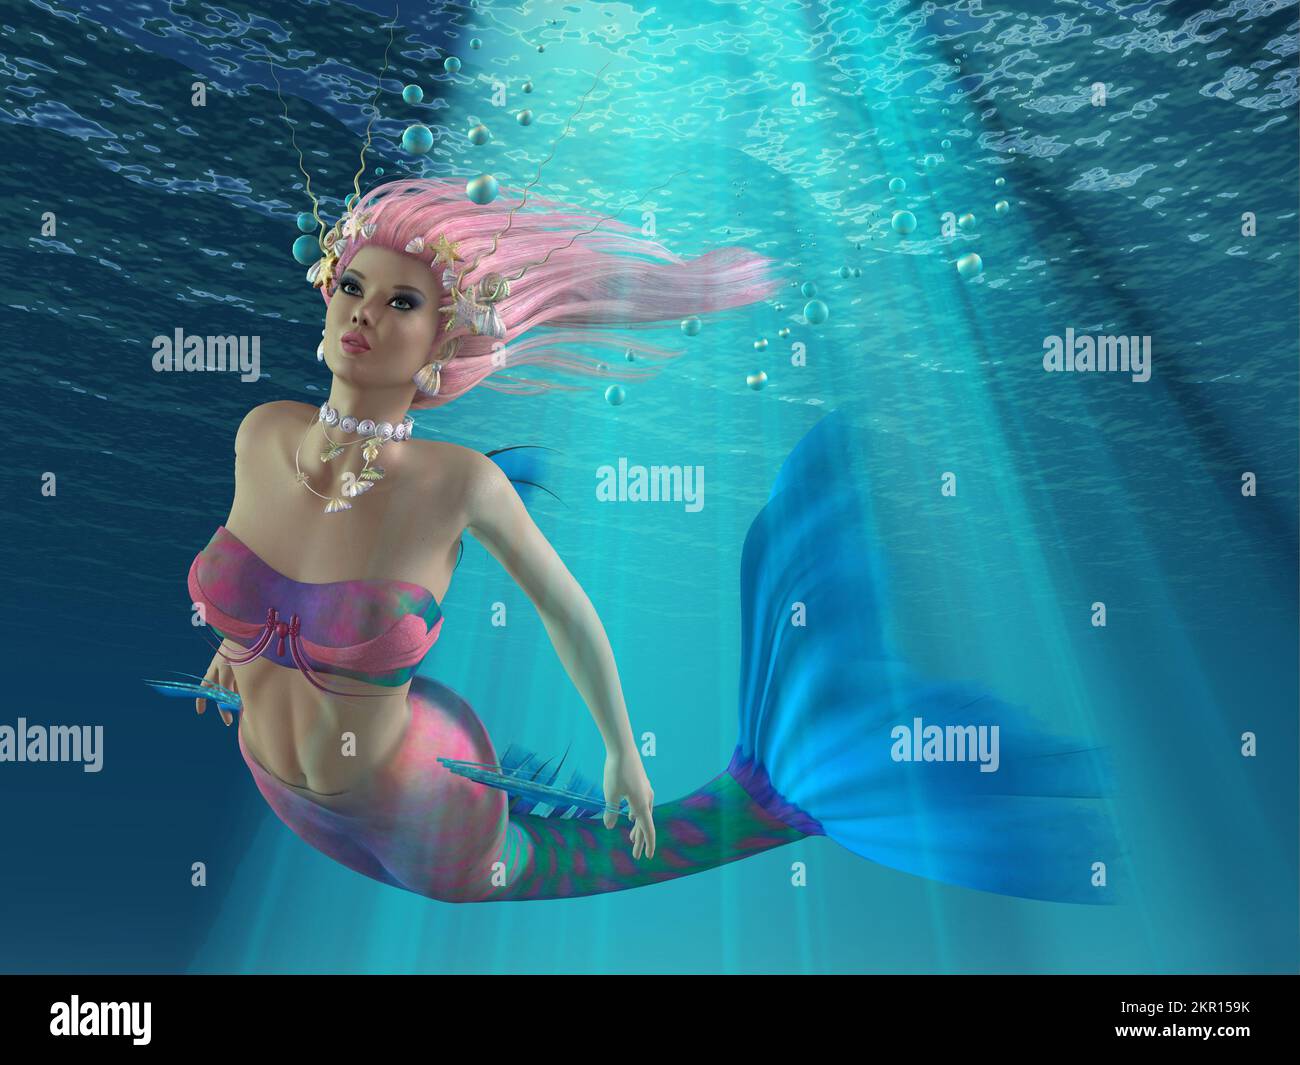 Turmaline the Mermaid swims underwater through rays of sunshine along with blue bubbles. Stock Photo